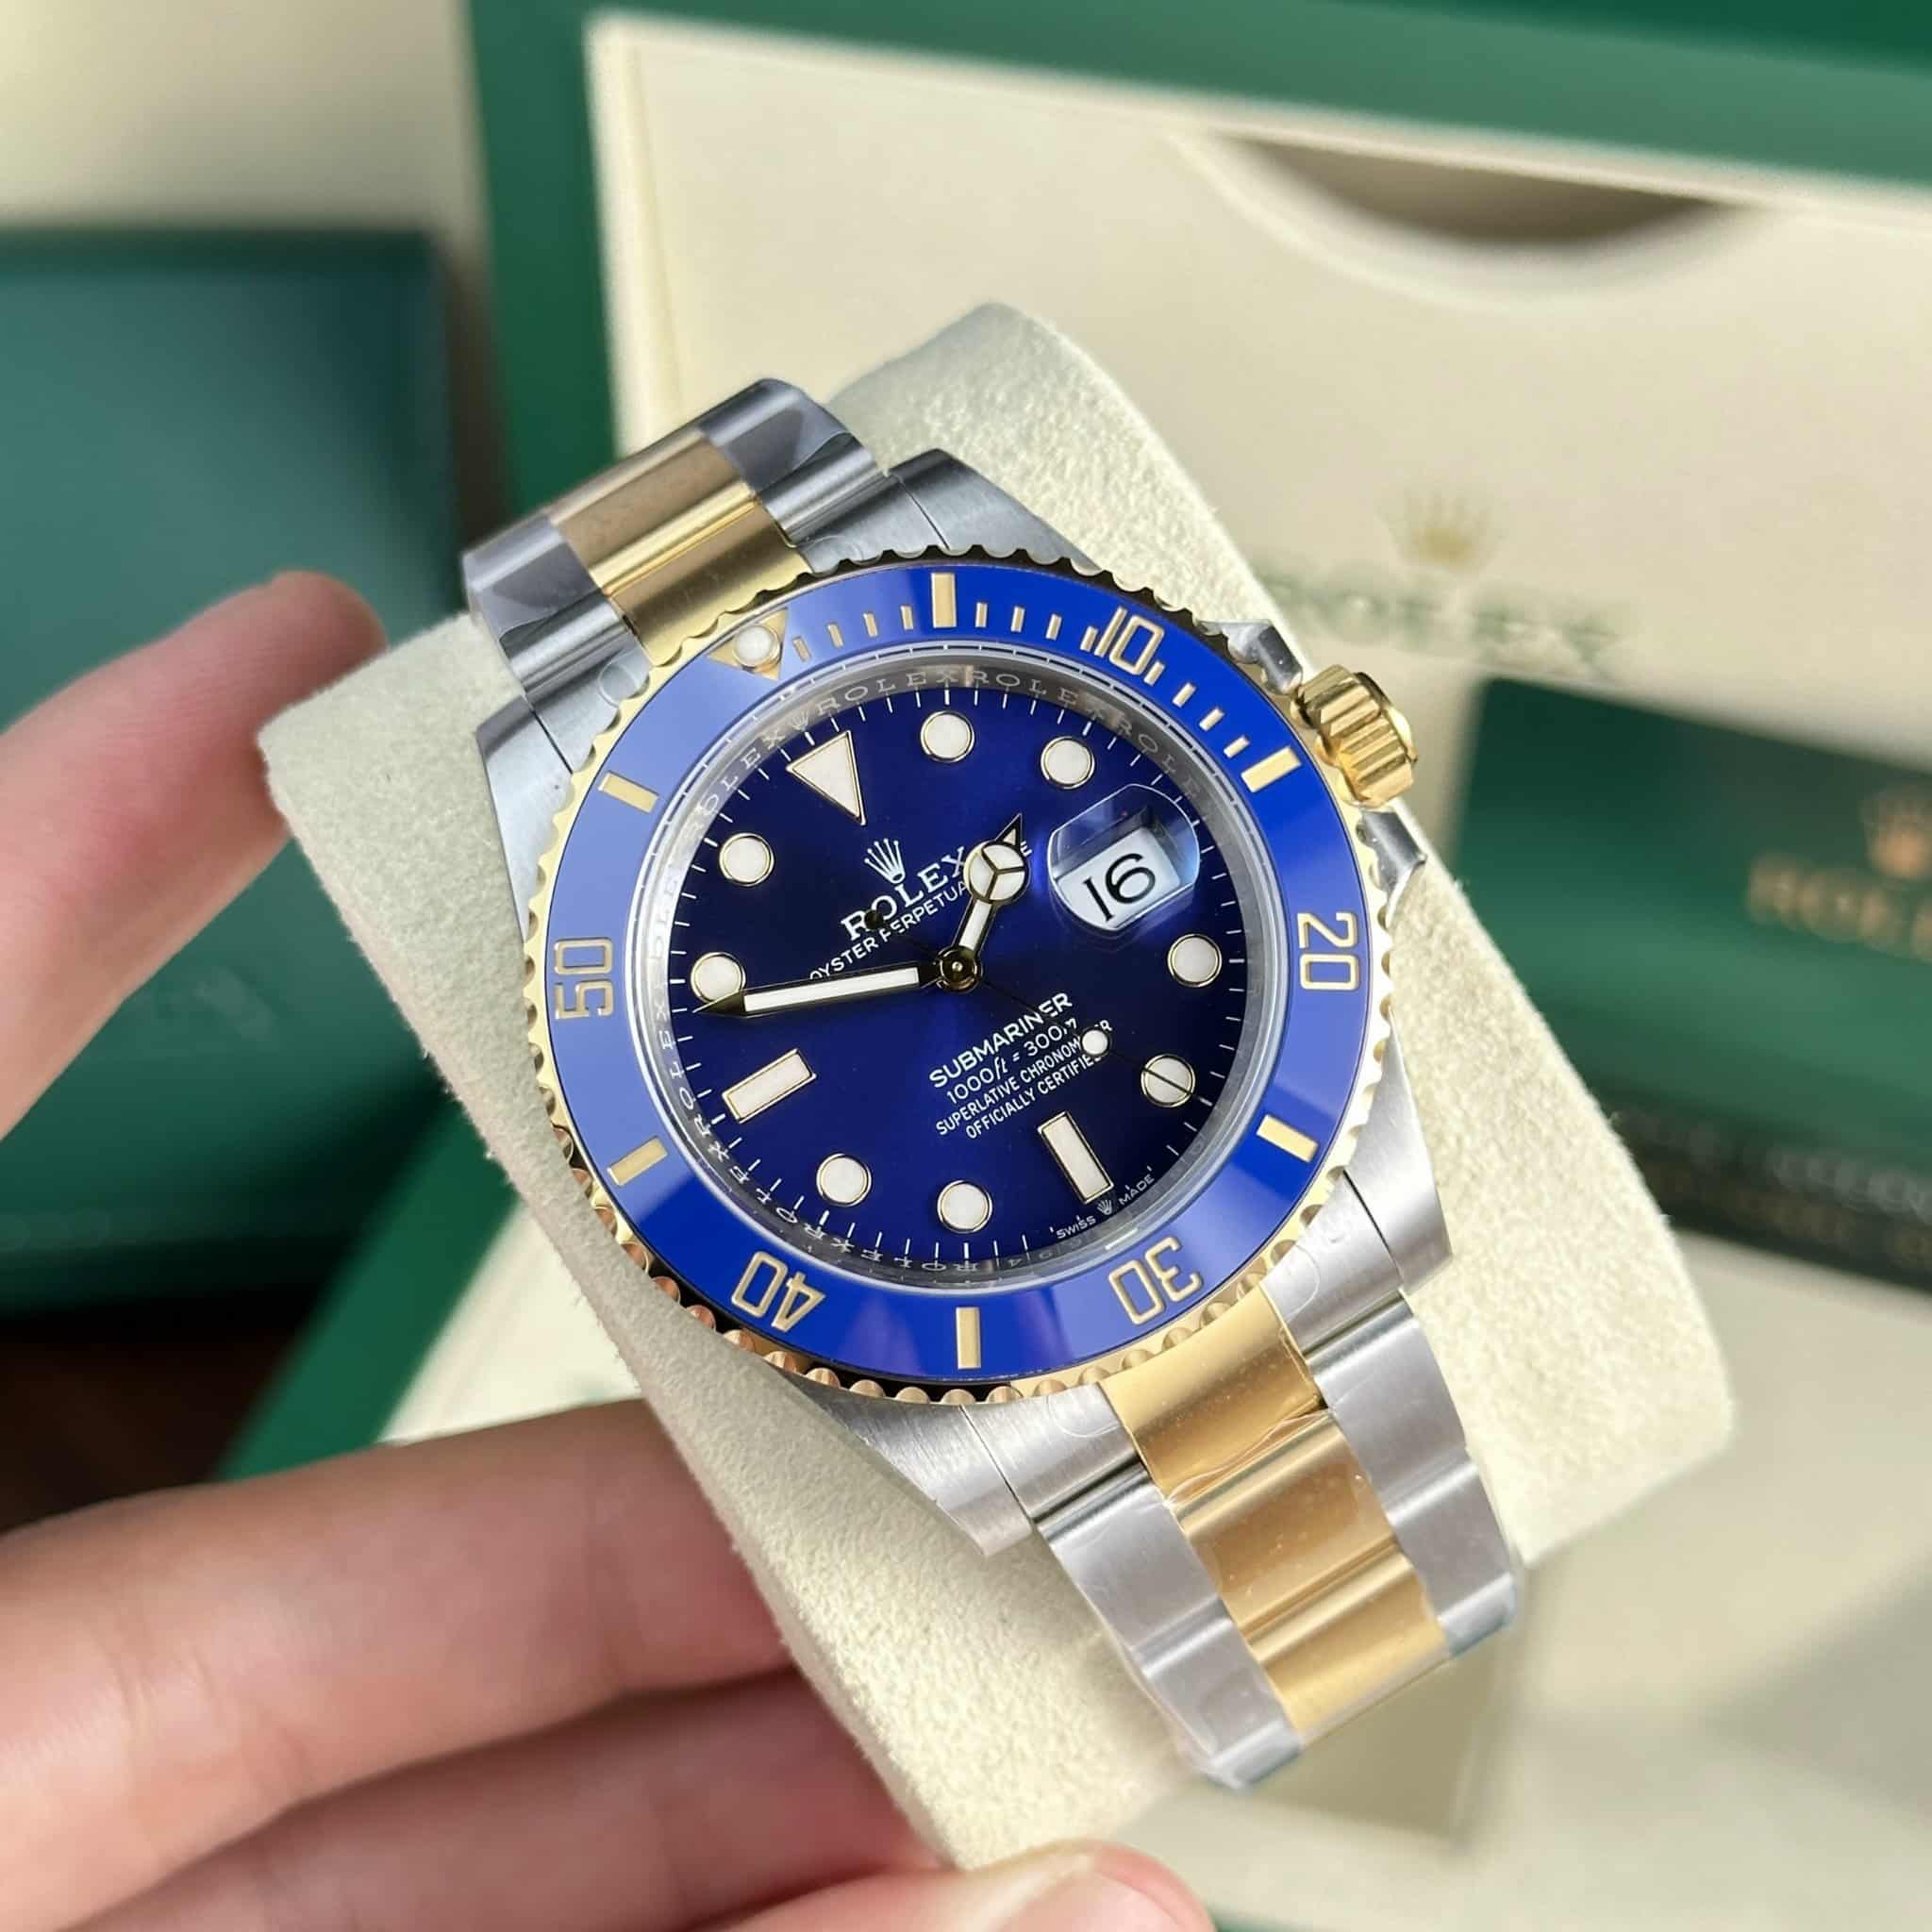 ROLEX SUBMARINER 126613LB-0002 TWO TONE YELLOW GOLD BLUE DIAL